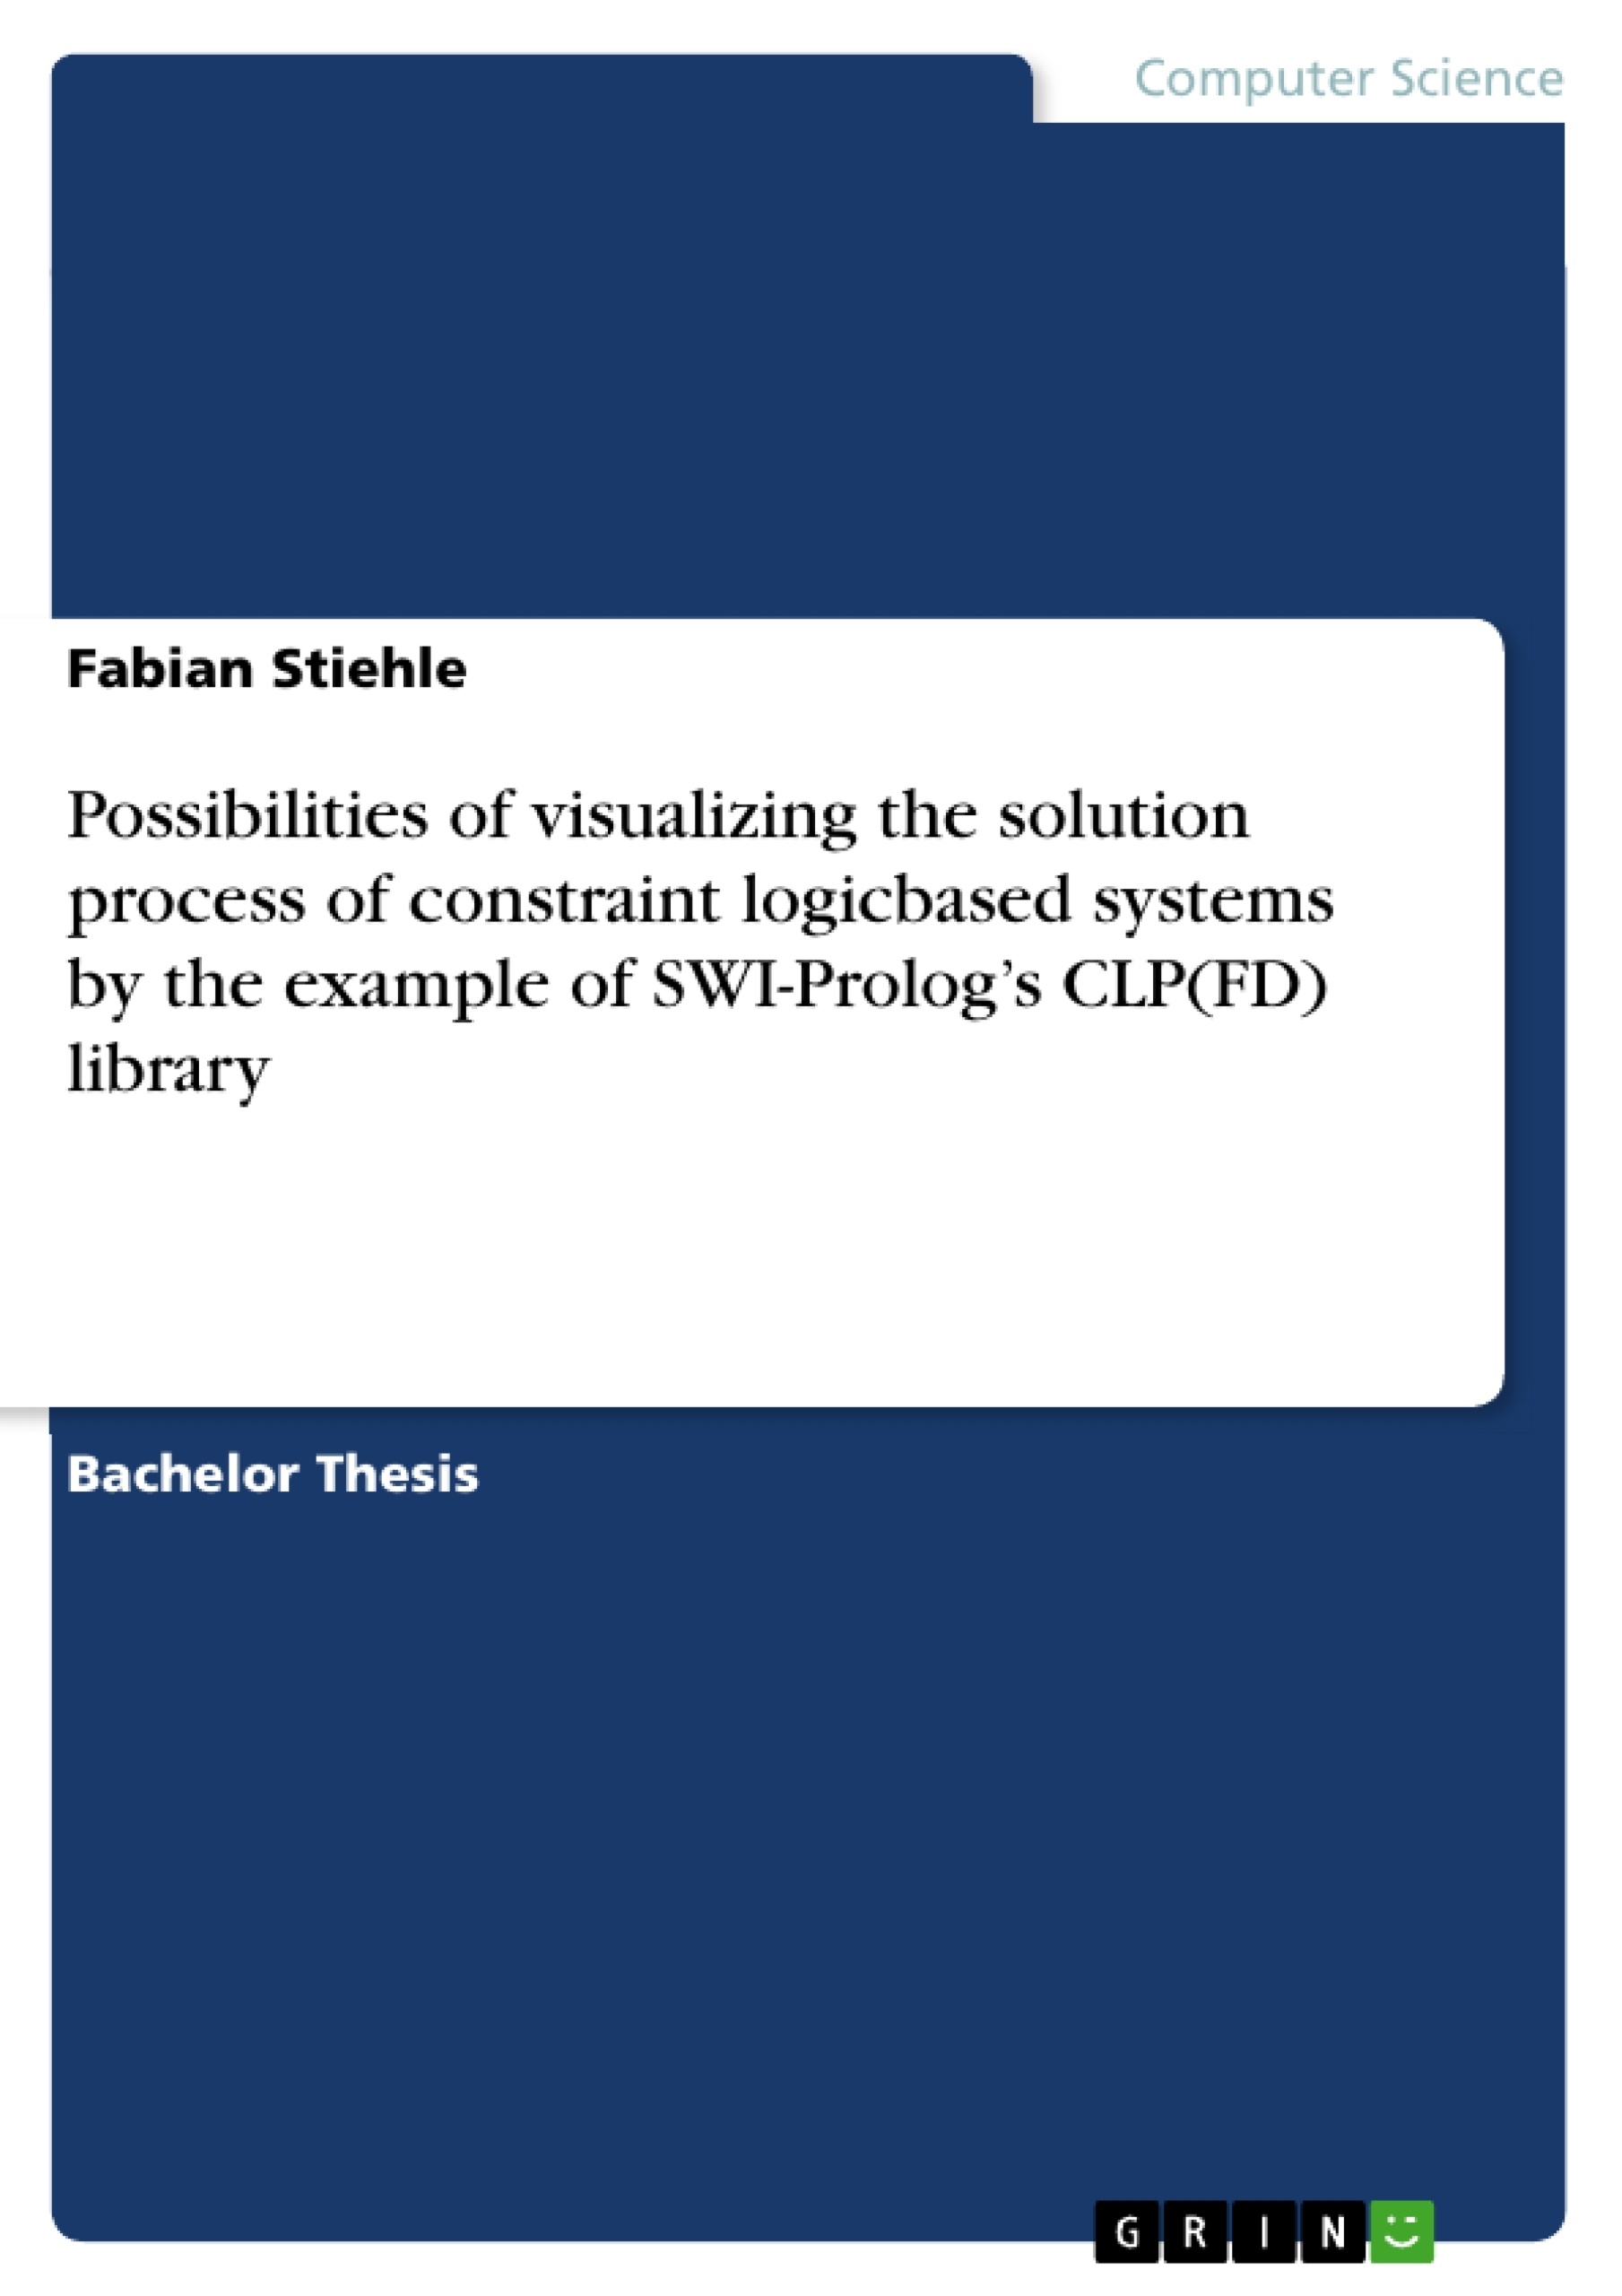 Title: Possibilities of visualizing the solution process of constraint logicbased systems by the example of SWI-Prolog’s CLP(FD) library